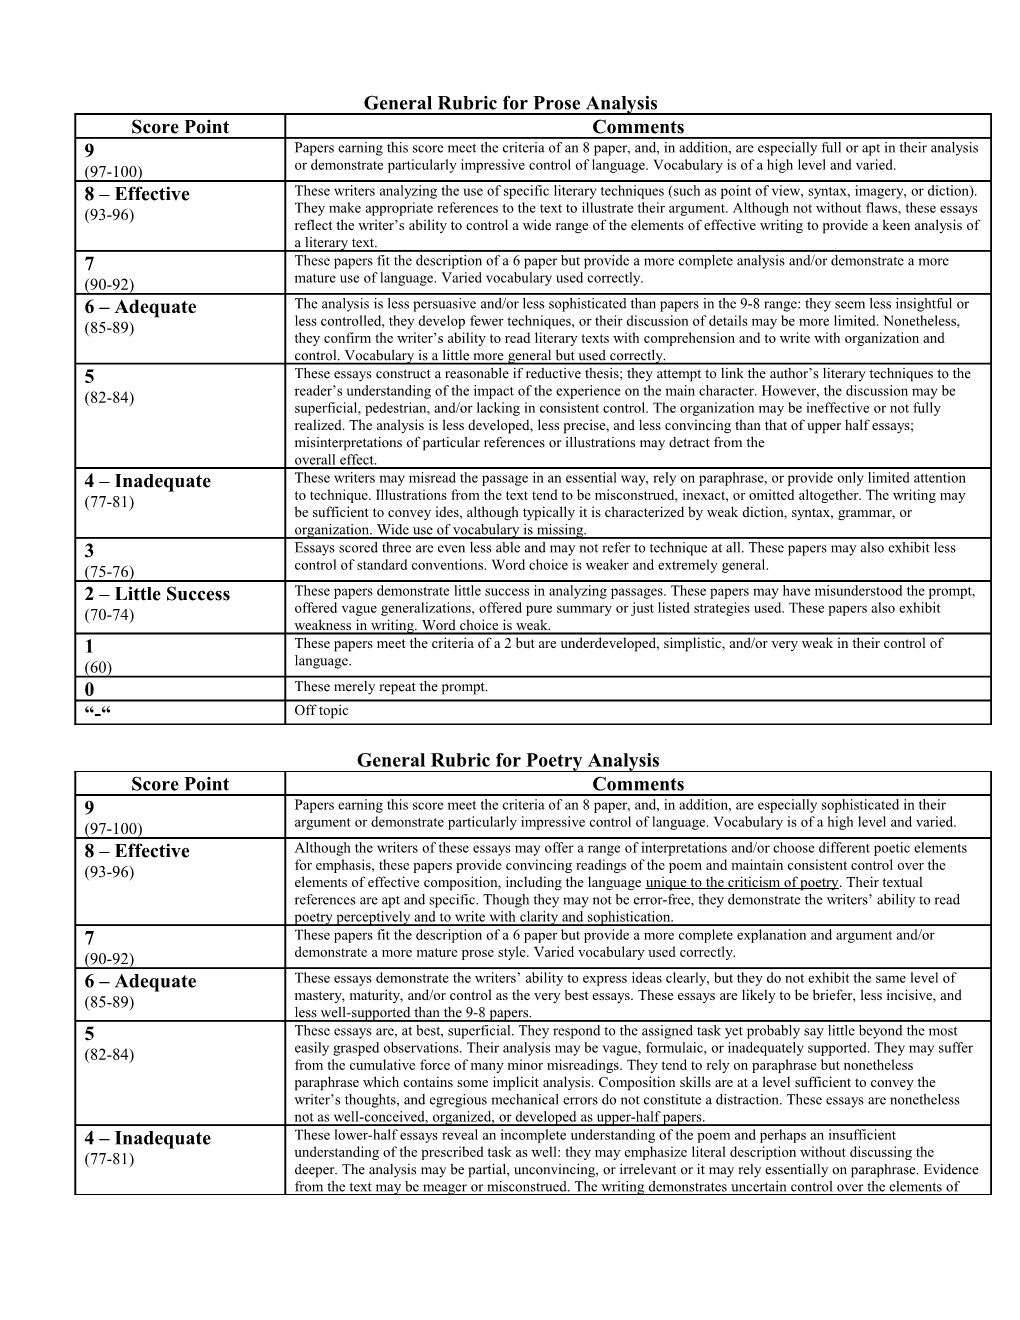 General Rubric for Prose Analysis